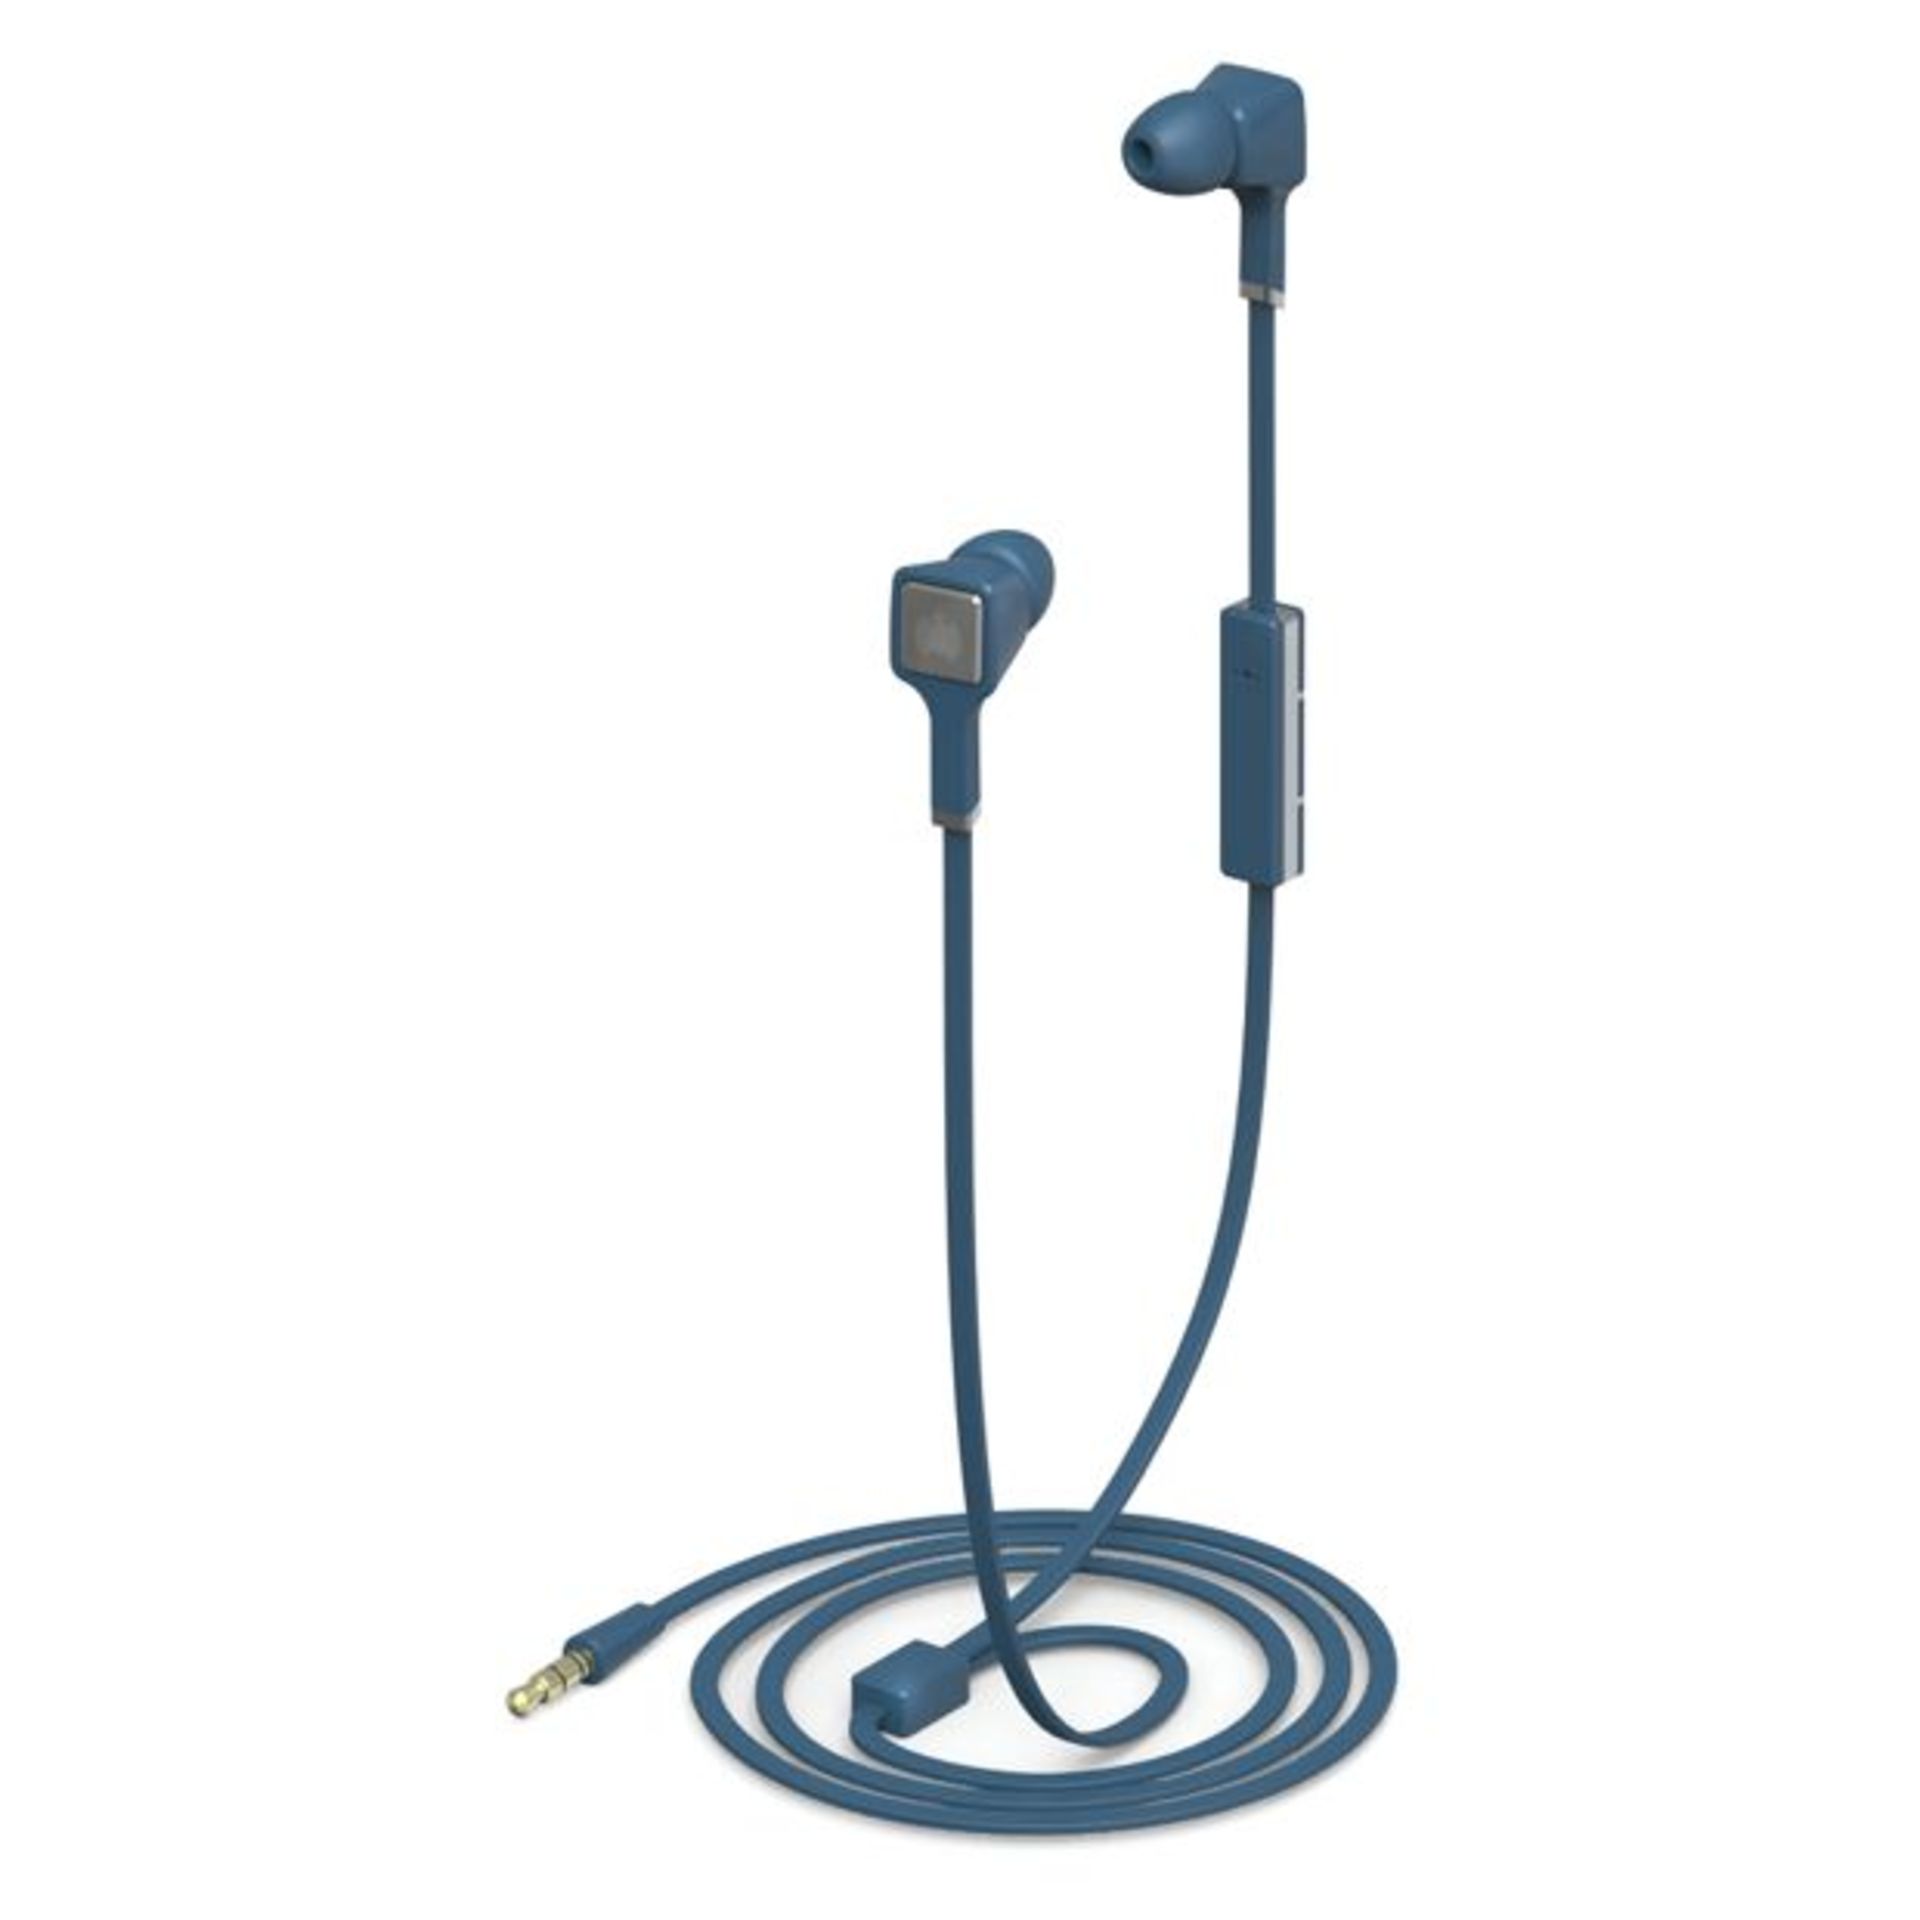 V *TRADE QTY* Brand New Ministry Of Sound Audio In - In Ear Headphones - Blue/Grey - RRP£39.99 X 8